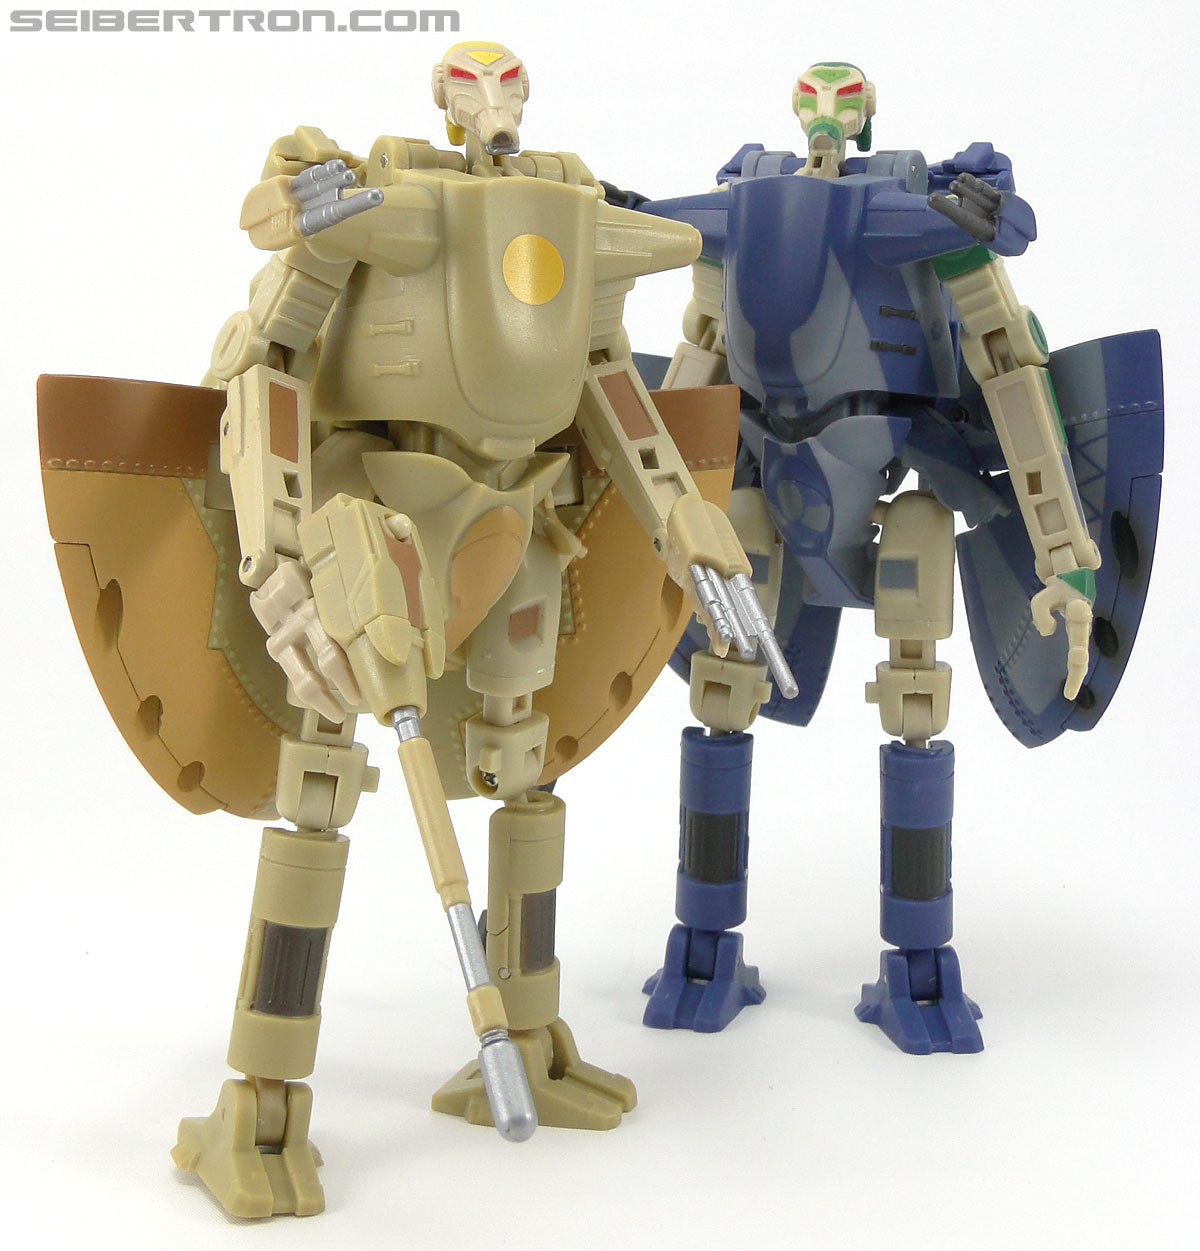 Star Wars Transformers Battle Droid Commader (Armored Assault Tank) (Battle Droid Commader) (Image #75 of 85)